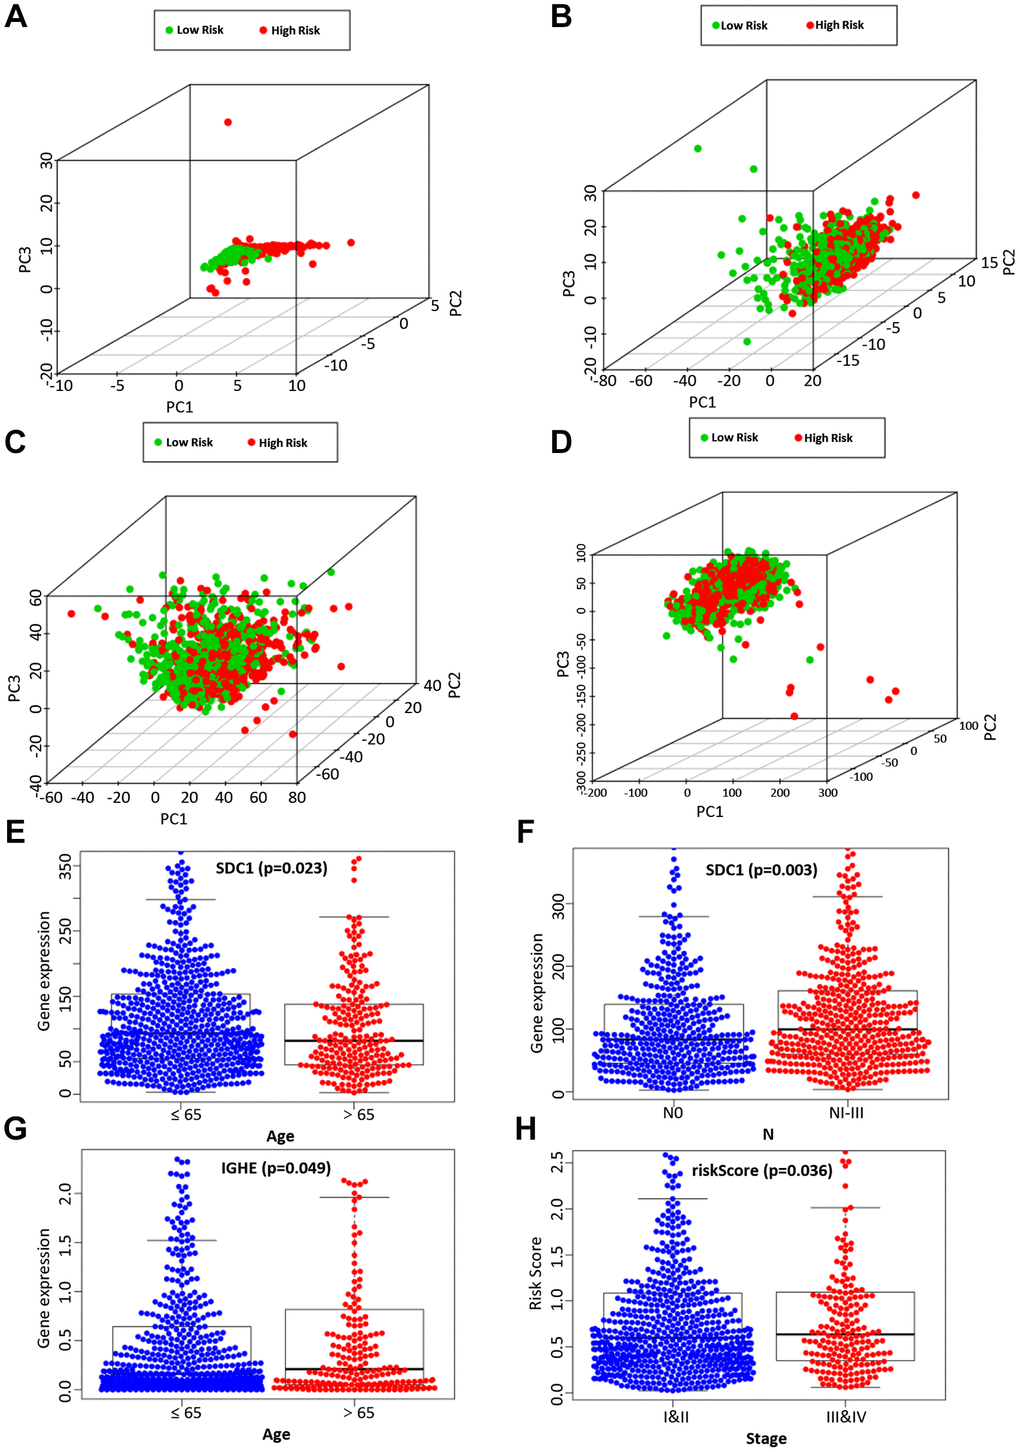 The PCA based on the immune-related signature (A), immune-related genes (B), differently expressed genes (C), and the entire gene expression profiles (D) between the high-risk group and low-risk group. The correlation of the immune-related signature with clinicopathological characteristics. SDC1 was associated with age (E) and lymph node metastasis (F). IGHE were associated with age (G). The risk score of our prognostic model was significantly associated with a higher tumor stage (H).